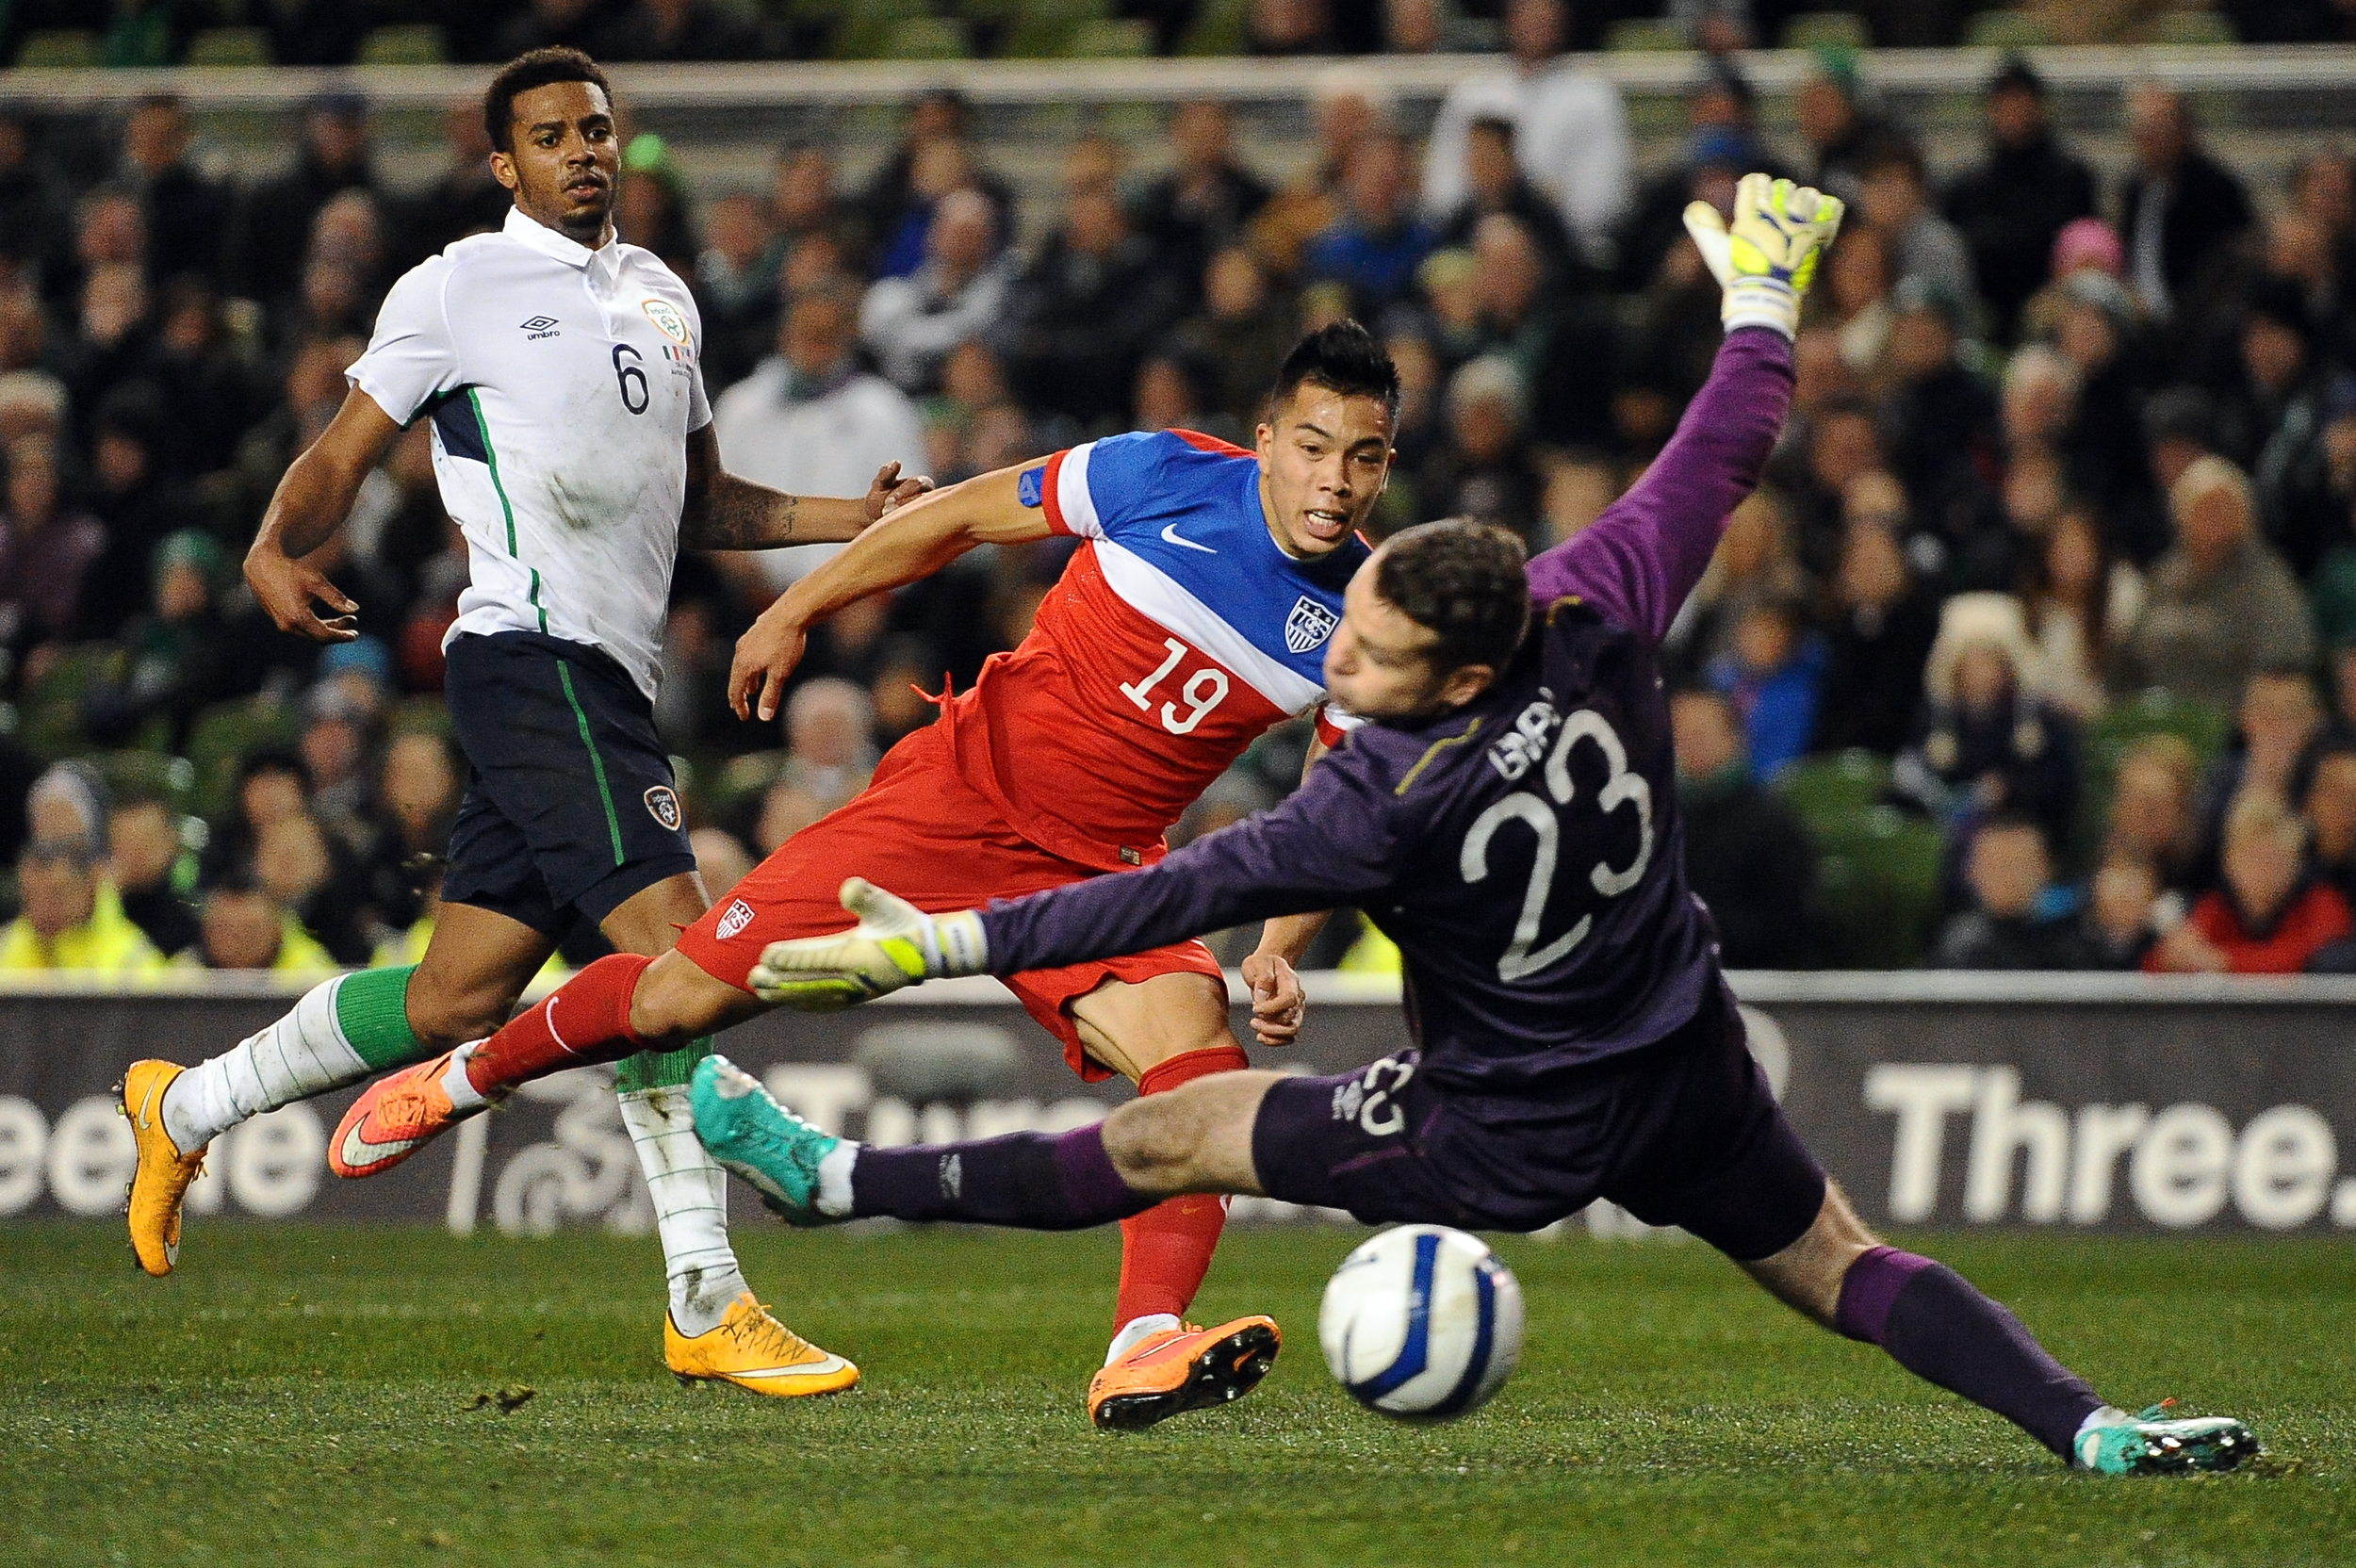  Bobby Wood of USA shoots past Republic of Ireland goalkeeper Shay Given during their International Friendly match at Aviva Stadium in Dublin 2014 /  Sportsfile  